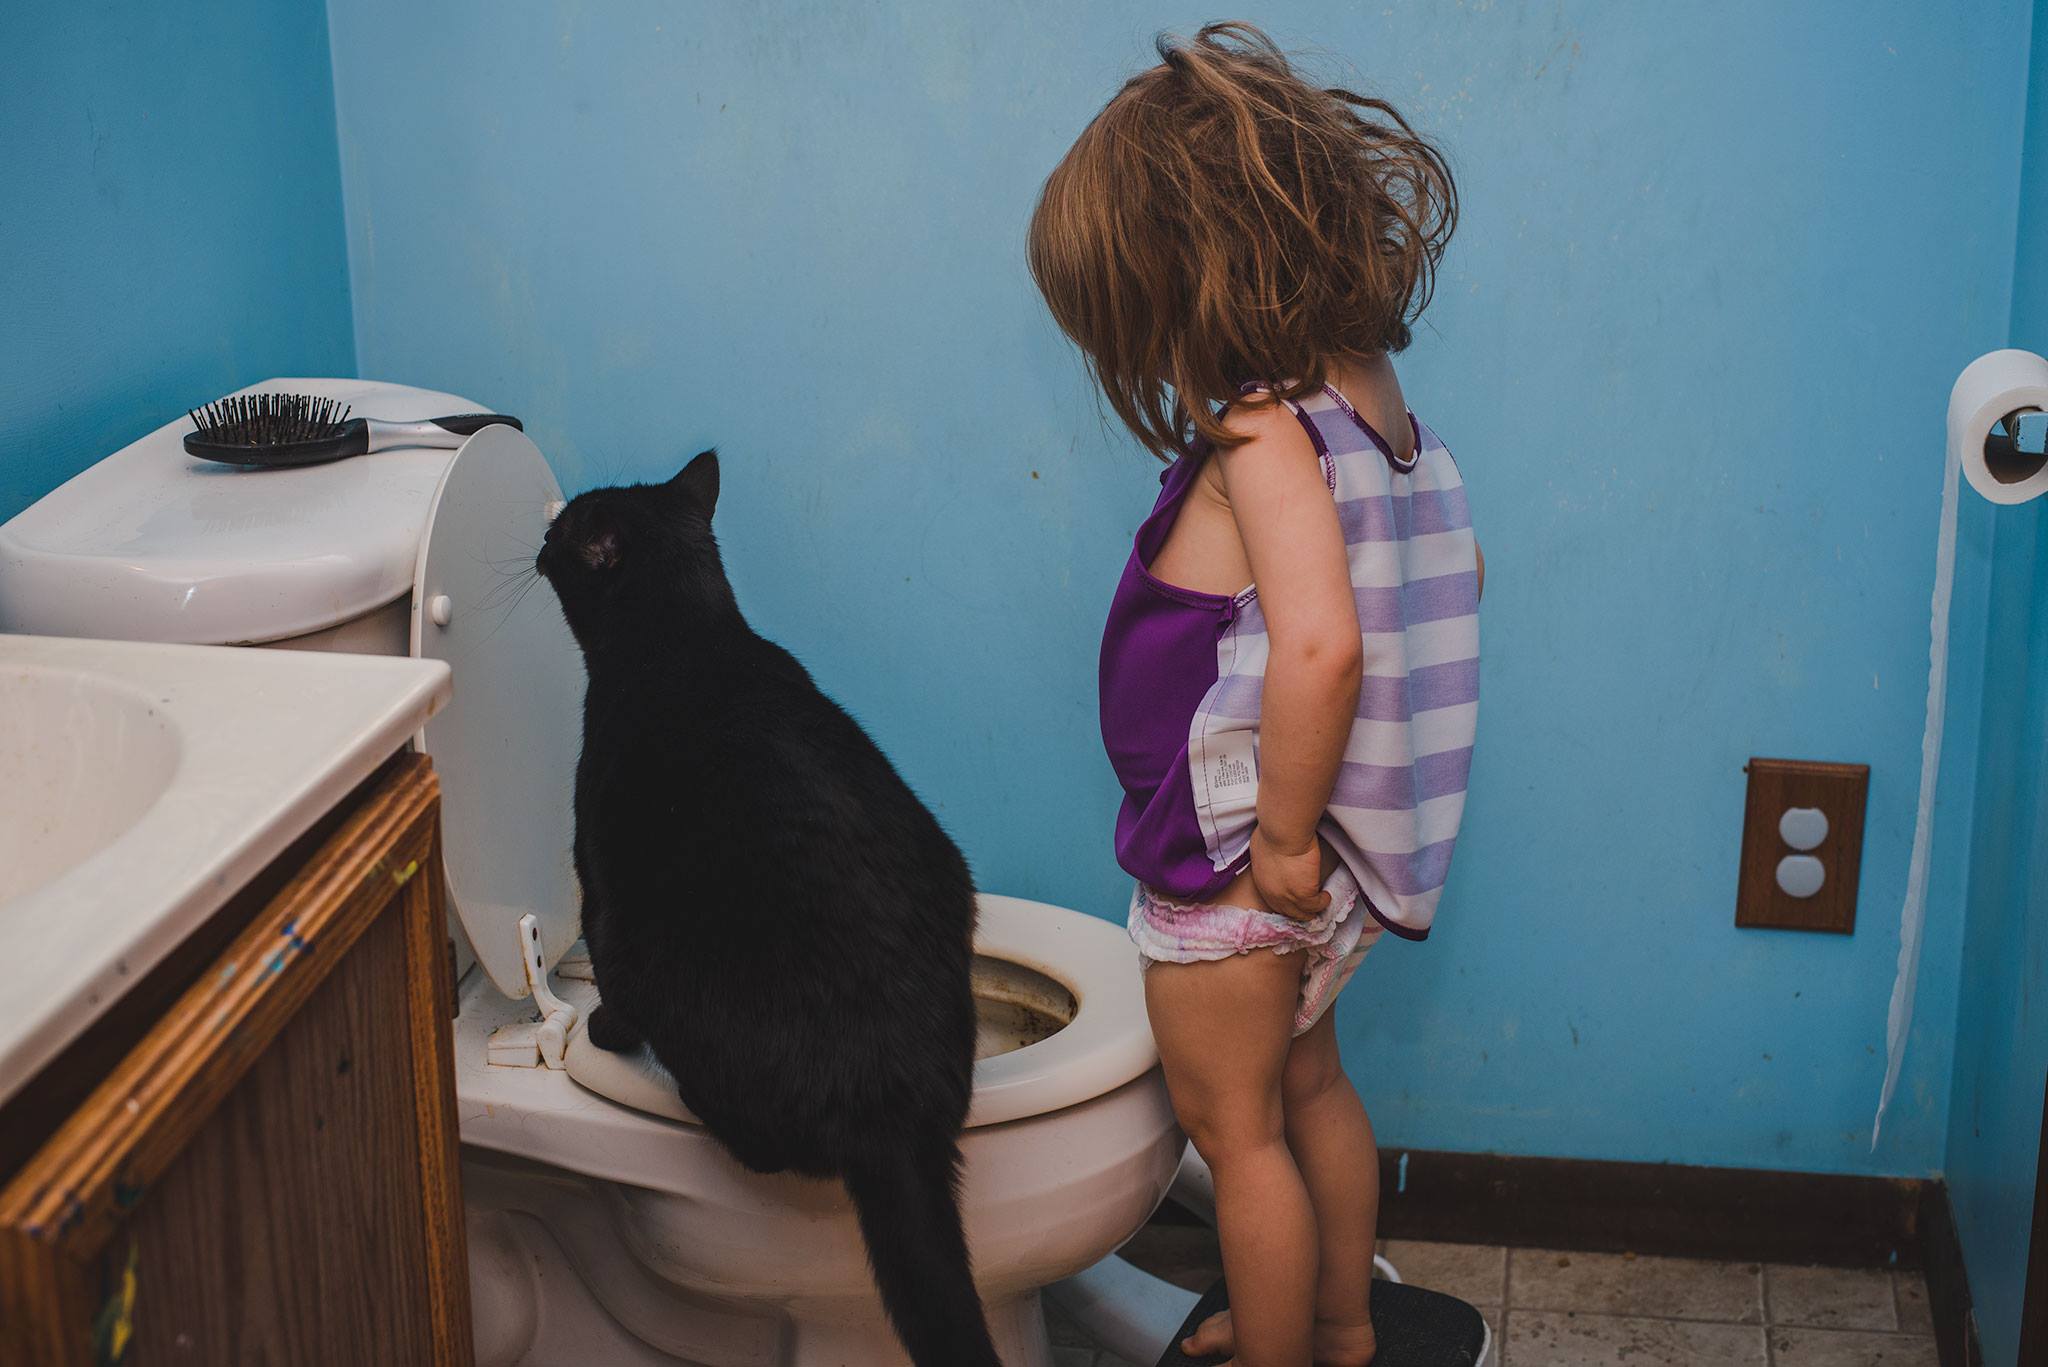 cat sits on toilet seat while girl pulls up pants - Documentary Family Photography